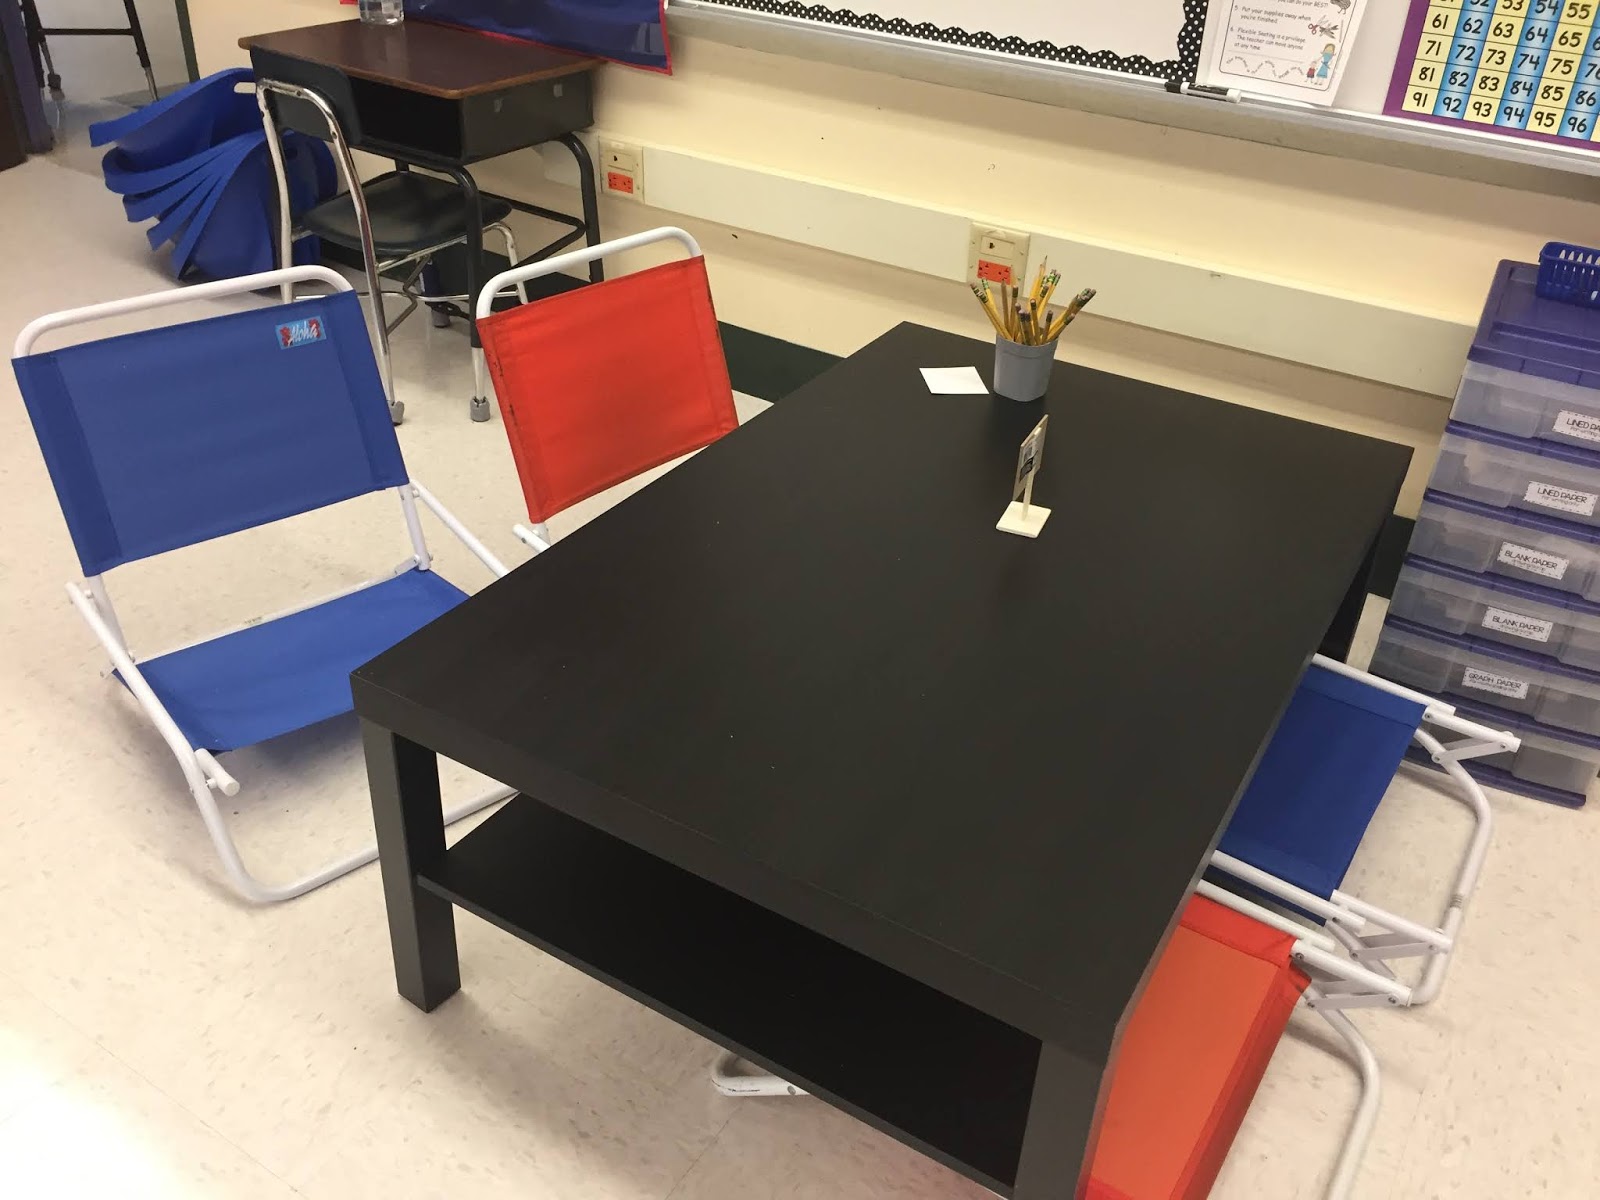 Plastic storage with drawer for paper in flexible seating classroom